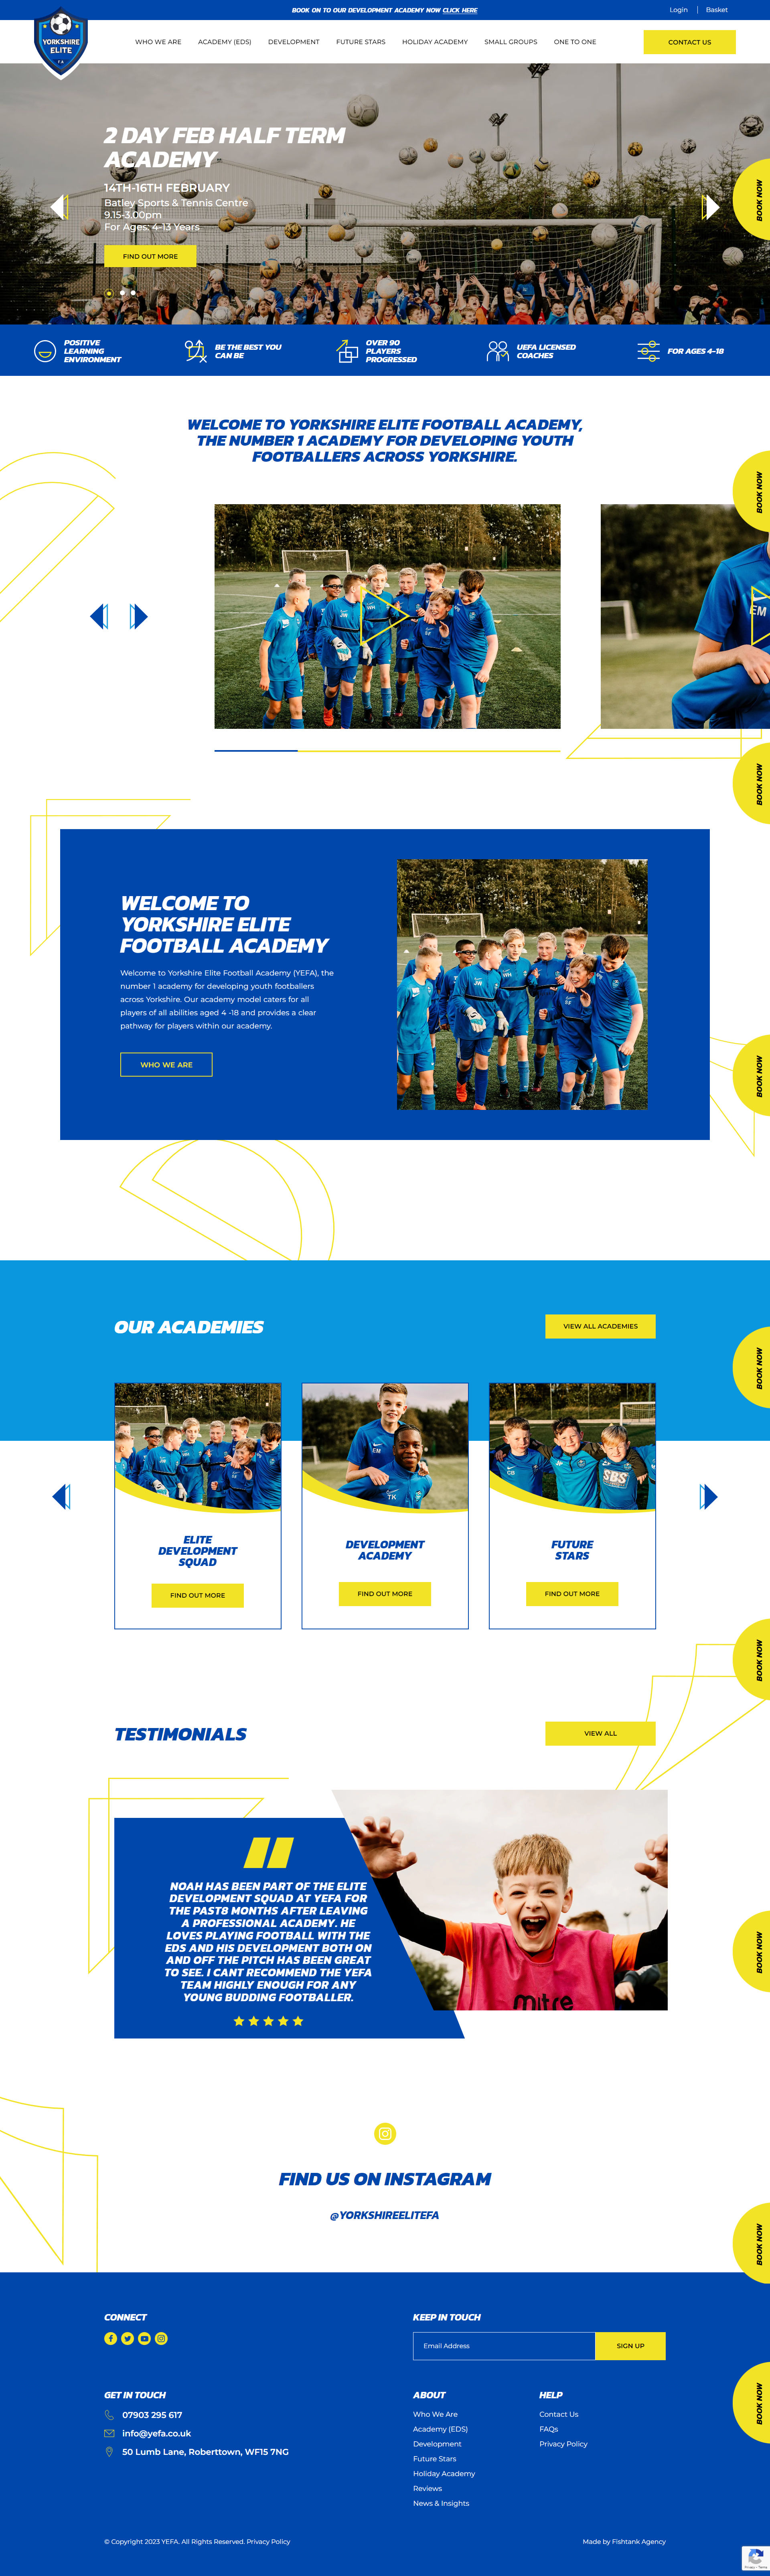 Yorkshire Elite Football Academy Community About Page